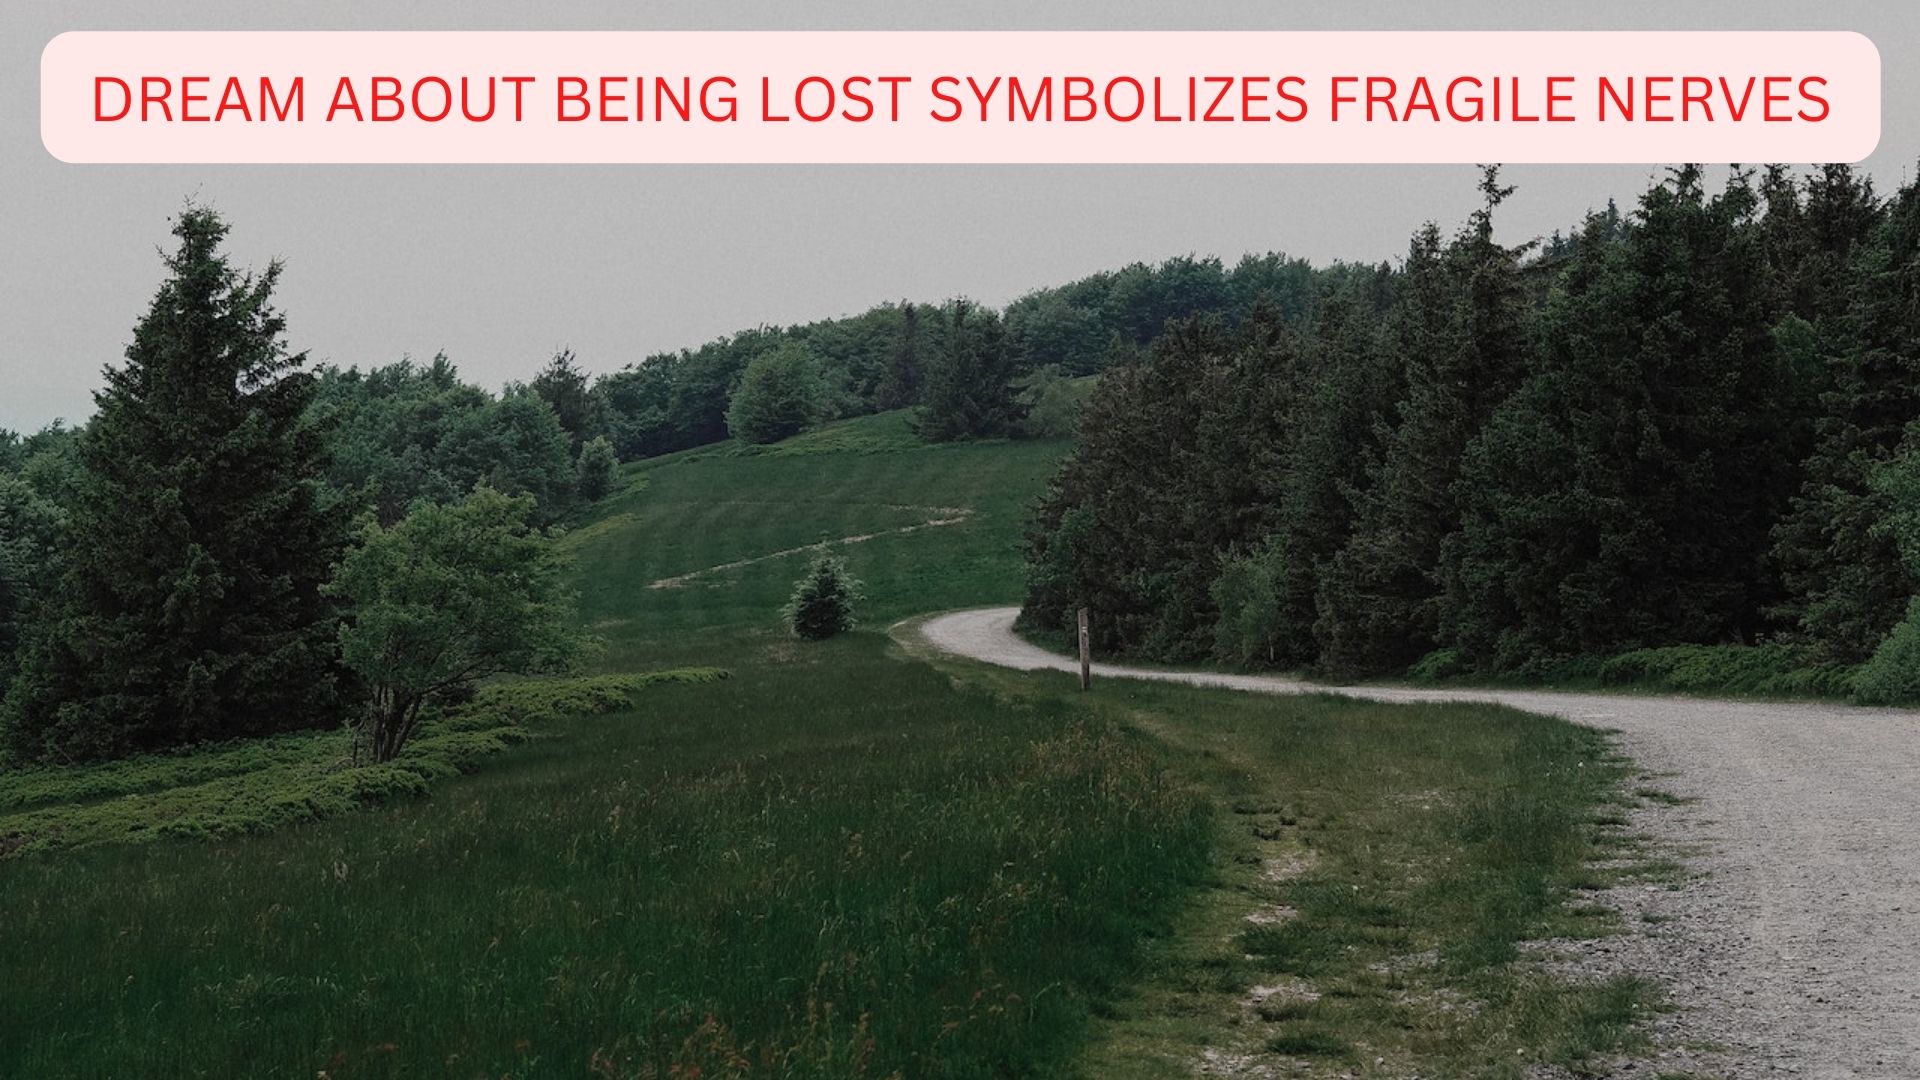 Dream About Being Lost - Symbolizes Fragile Nerves